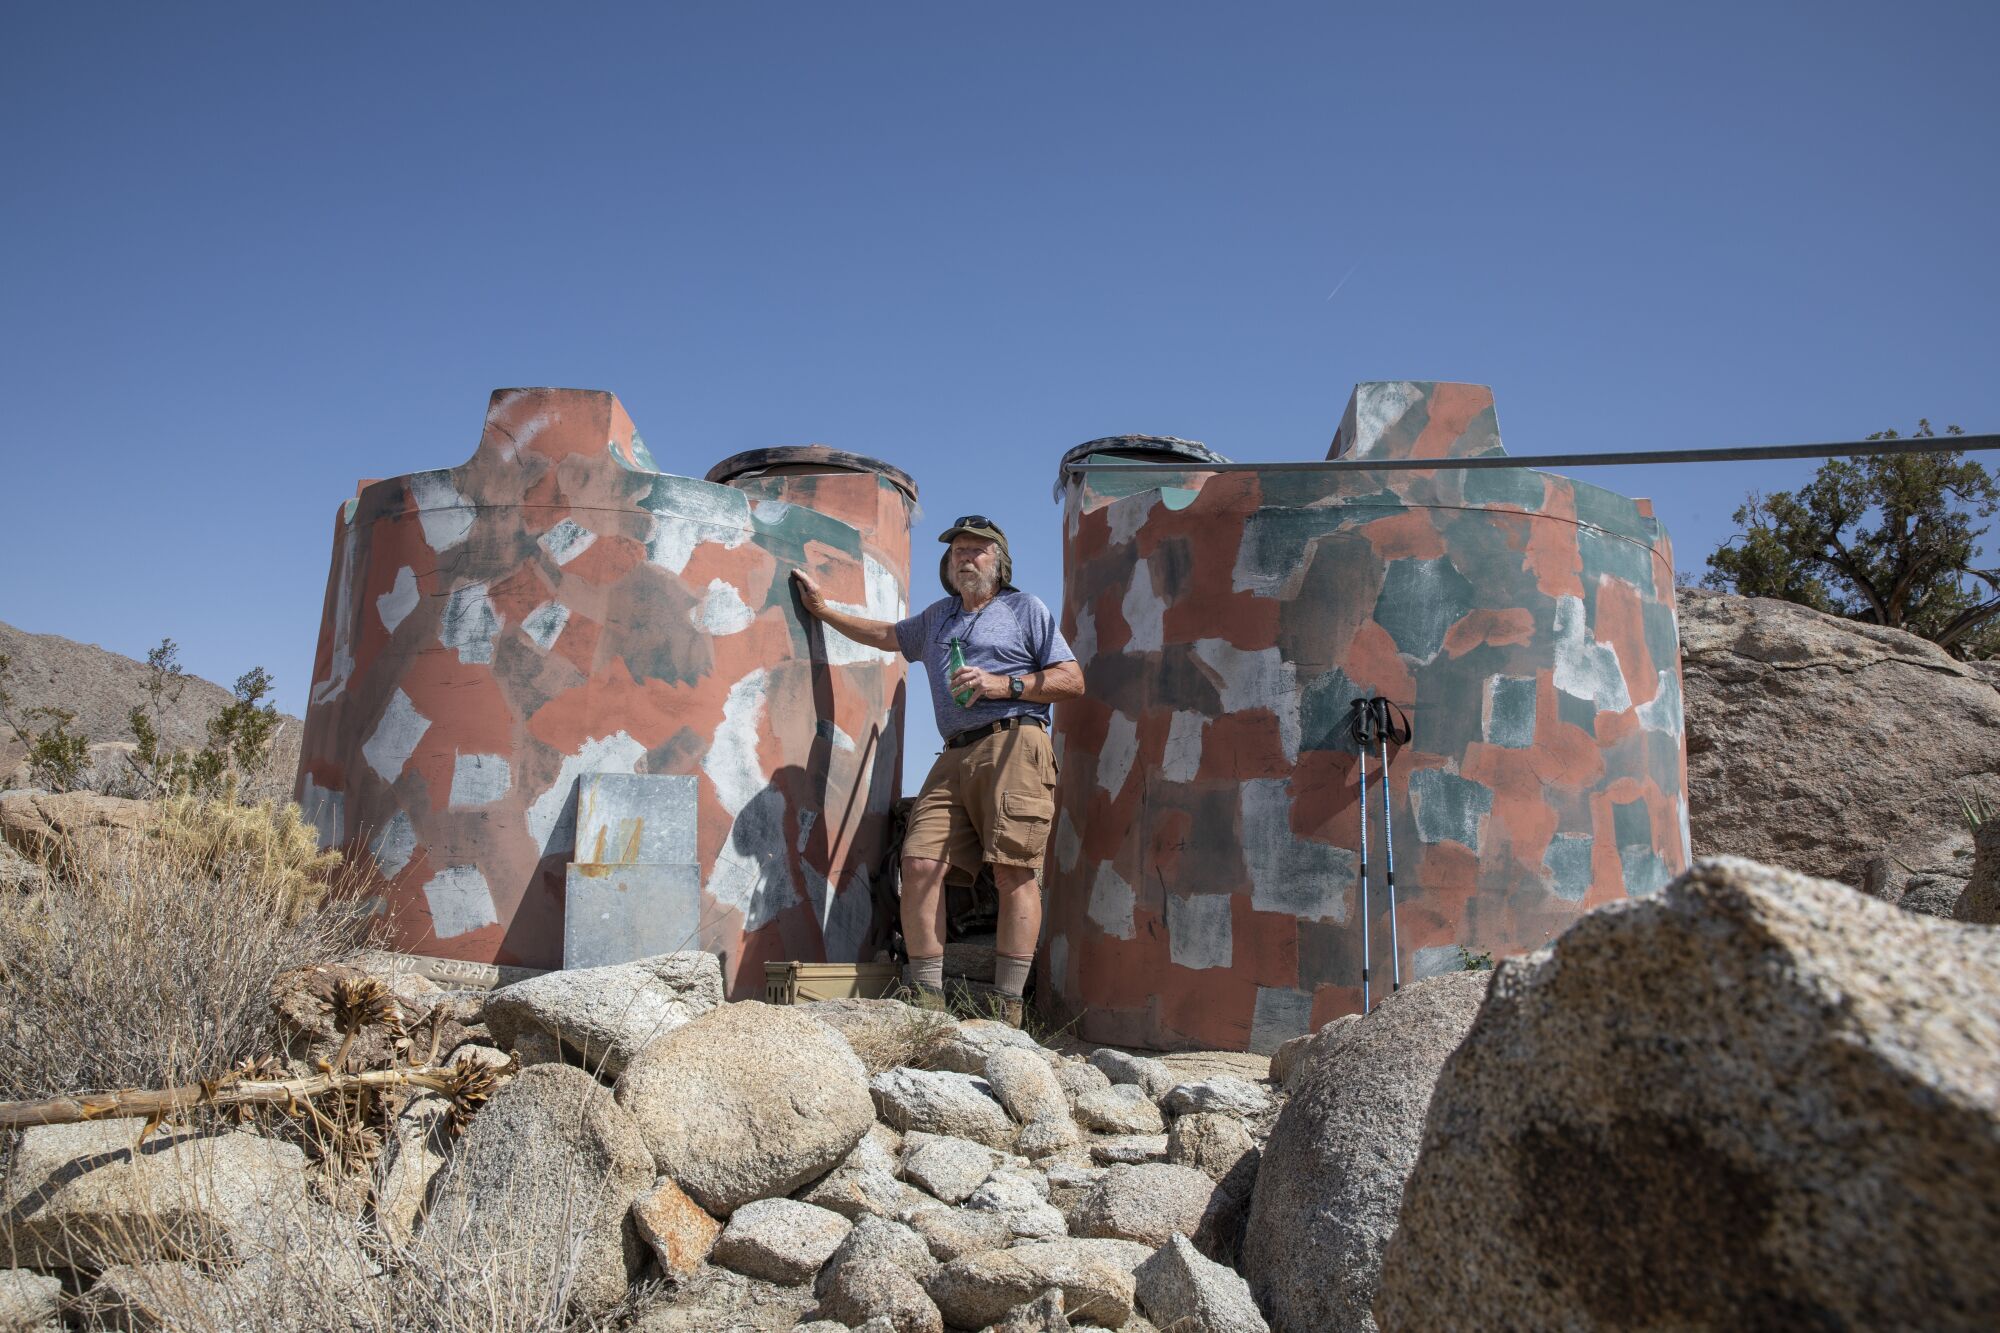 Mark Jorgensen stands by two water tanks in the desert.